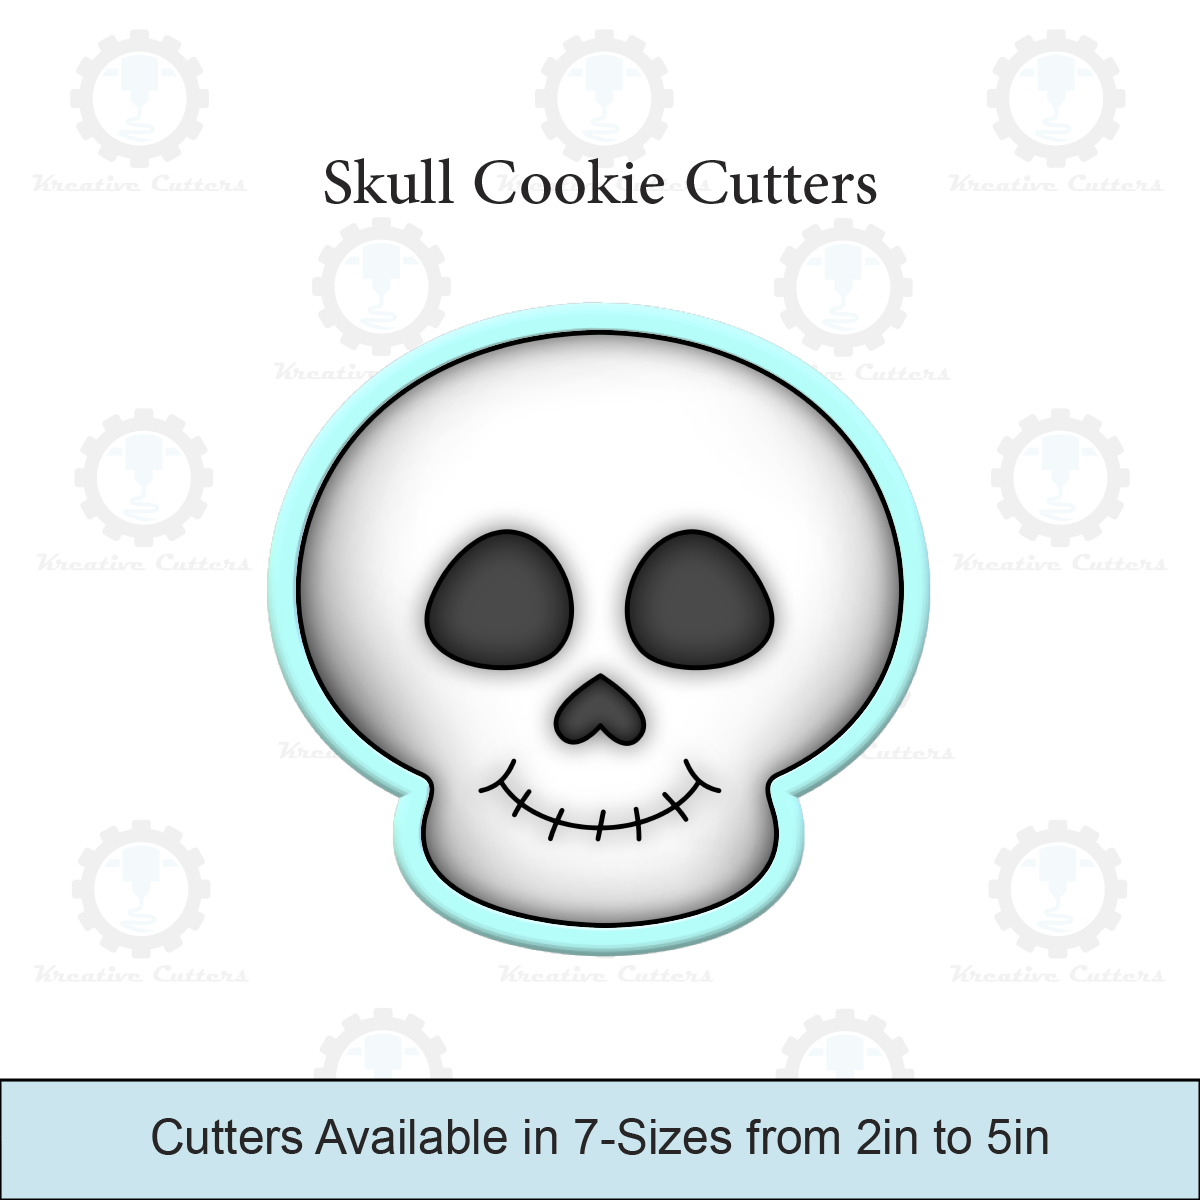 Skull Cookie Cutters